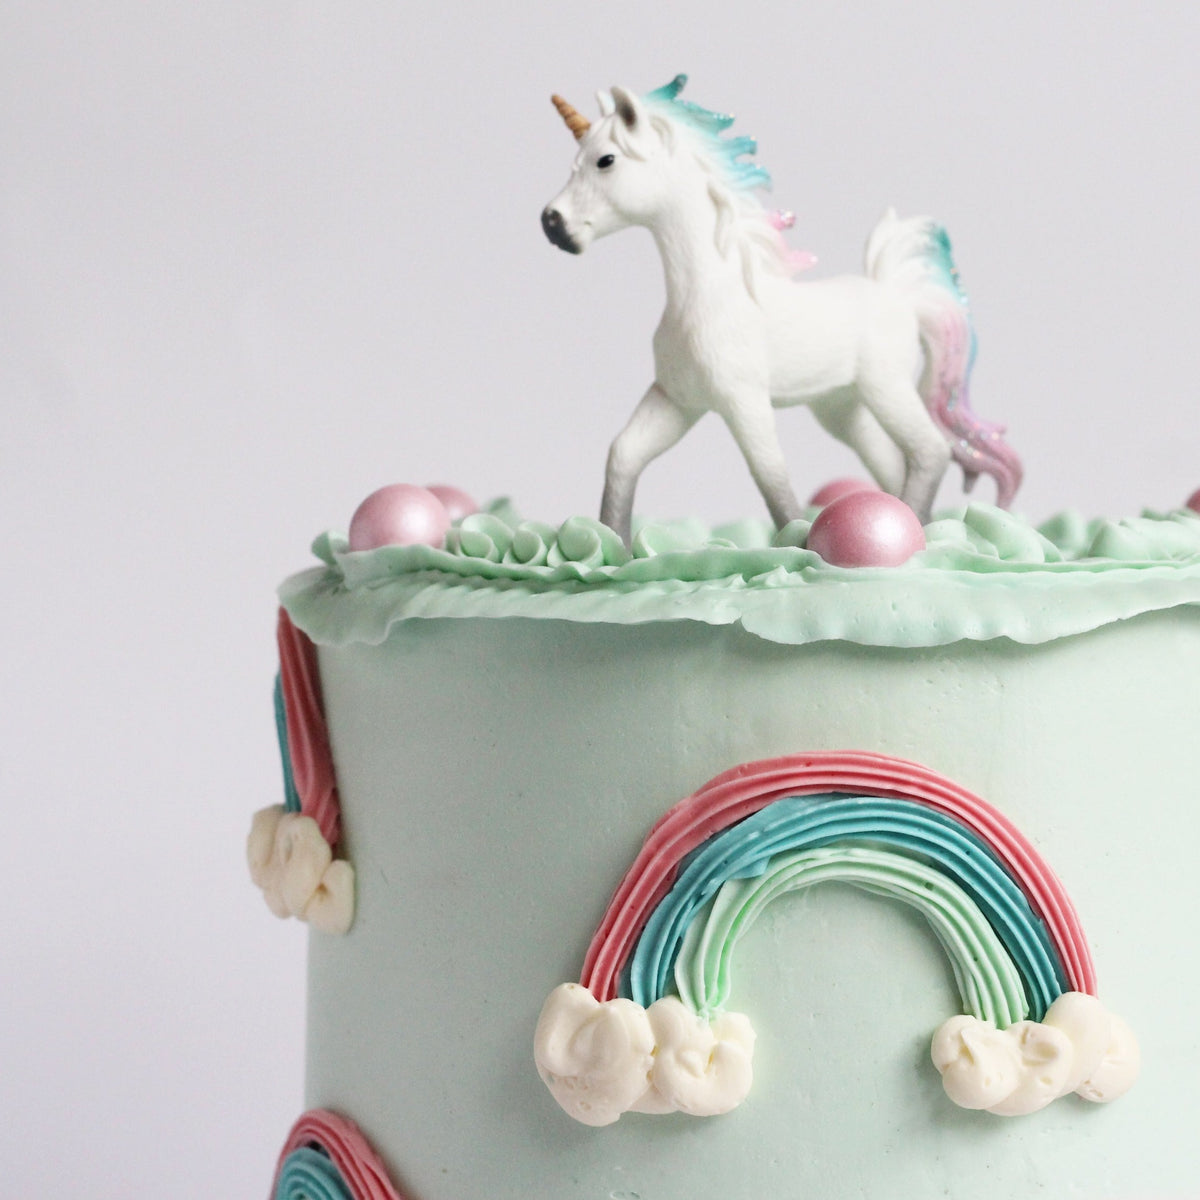 Our Rainbow Cake with peach &amp; mint ombre icing, 3D rainbows, creamy ruffles &amp; unicorn topper!